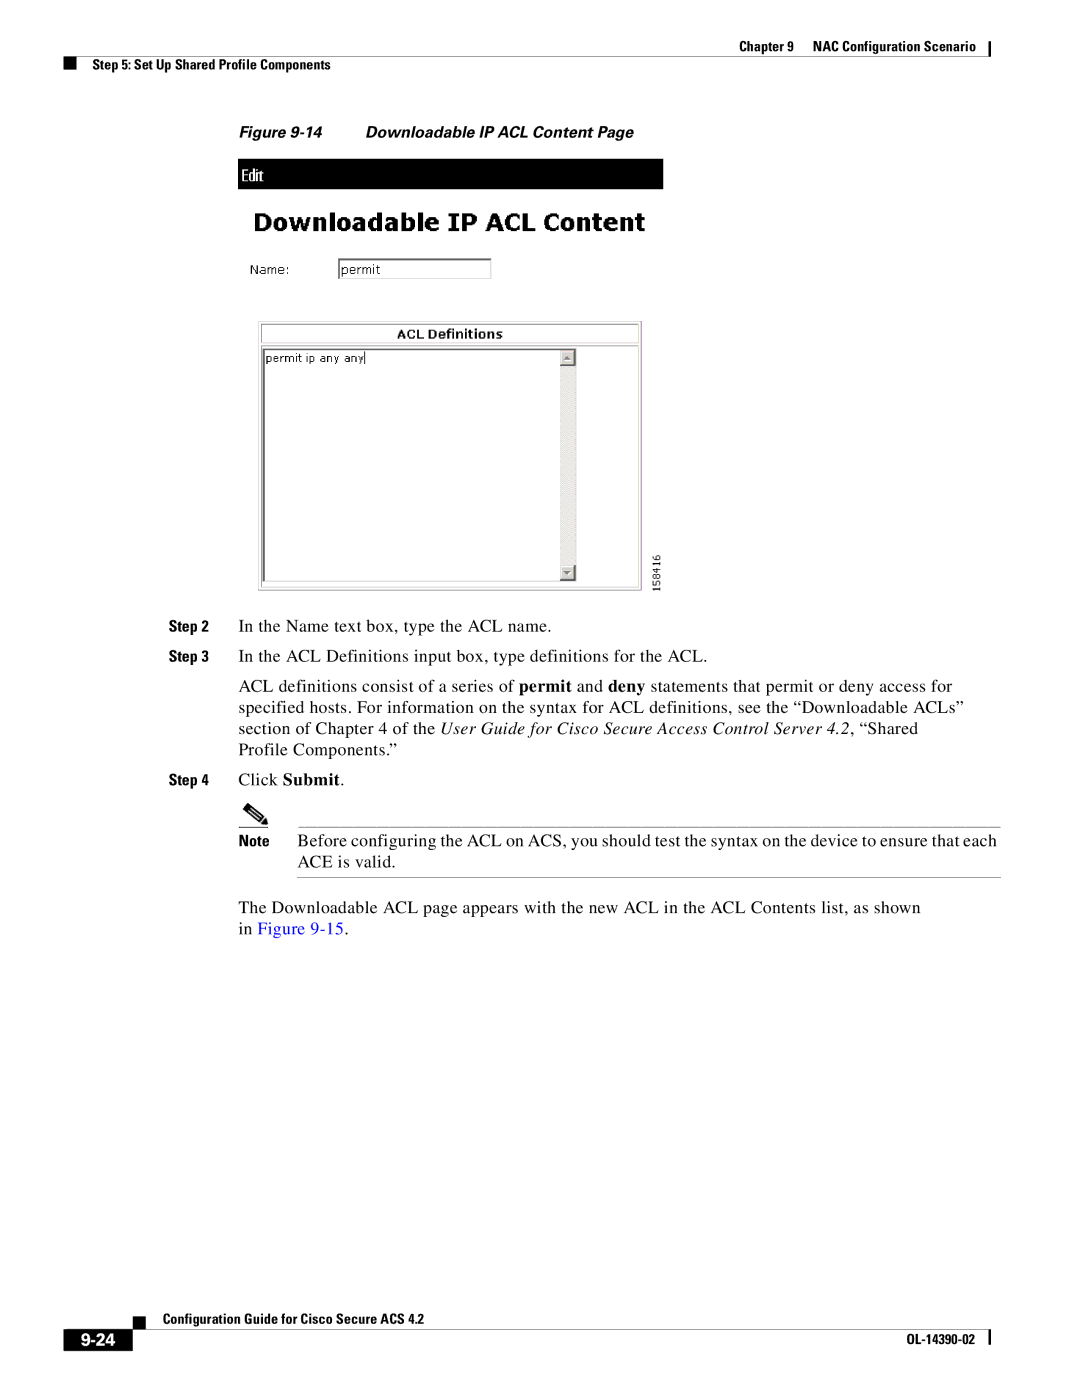 Cisco Systems 4.2 manual Downloadable IP ACL Content 